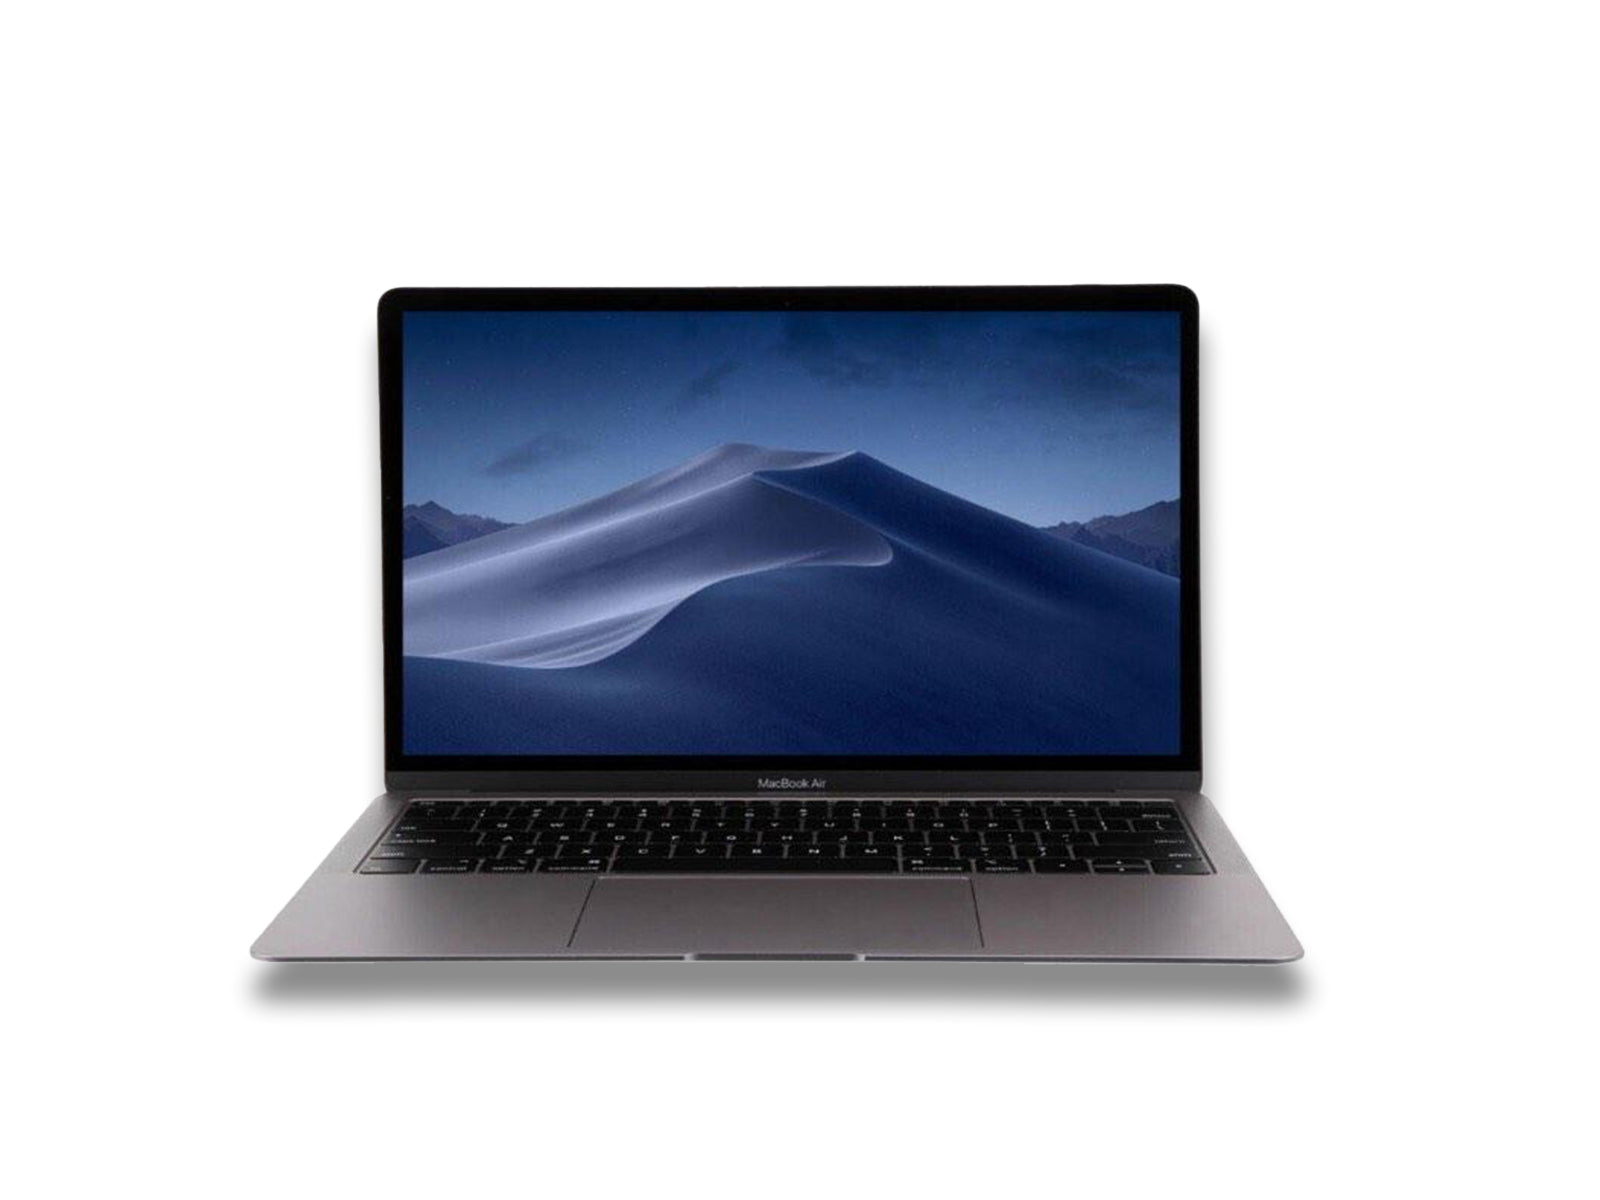 Image shows front view of macbook air with screen open on white background